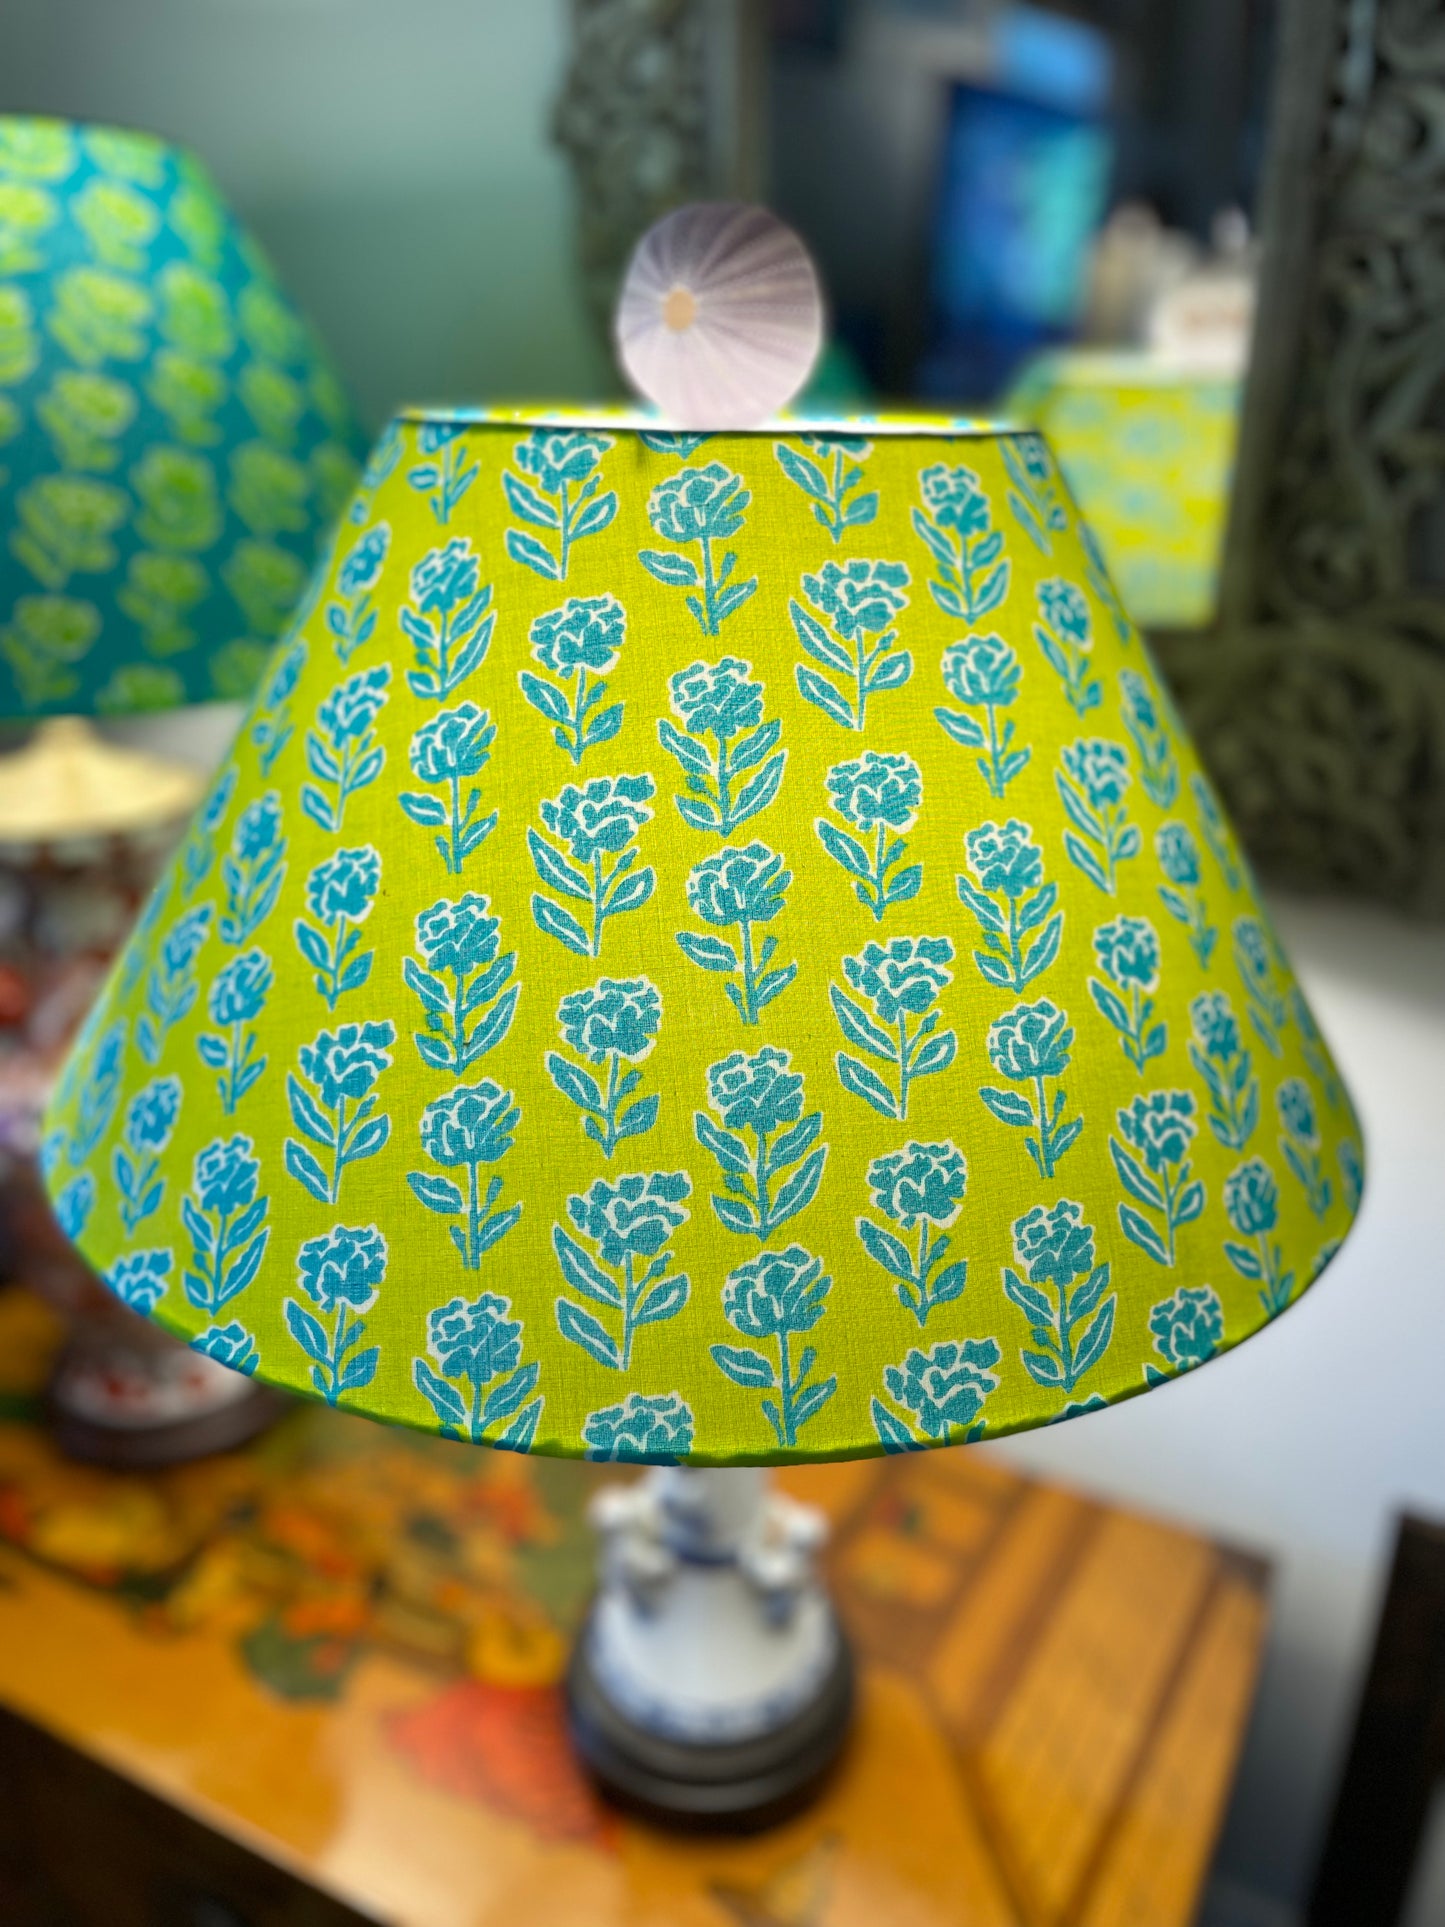 Large Conical Lampshade. Indian Block Print from Jaipur. Lime Green with Teal Floral.